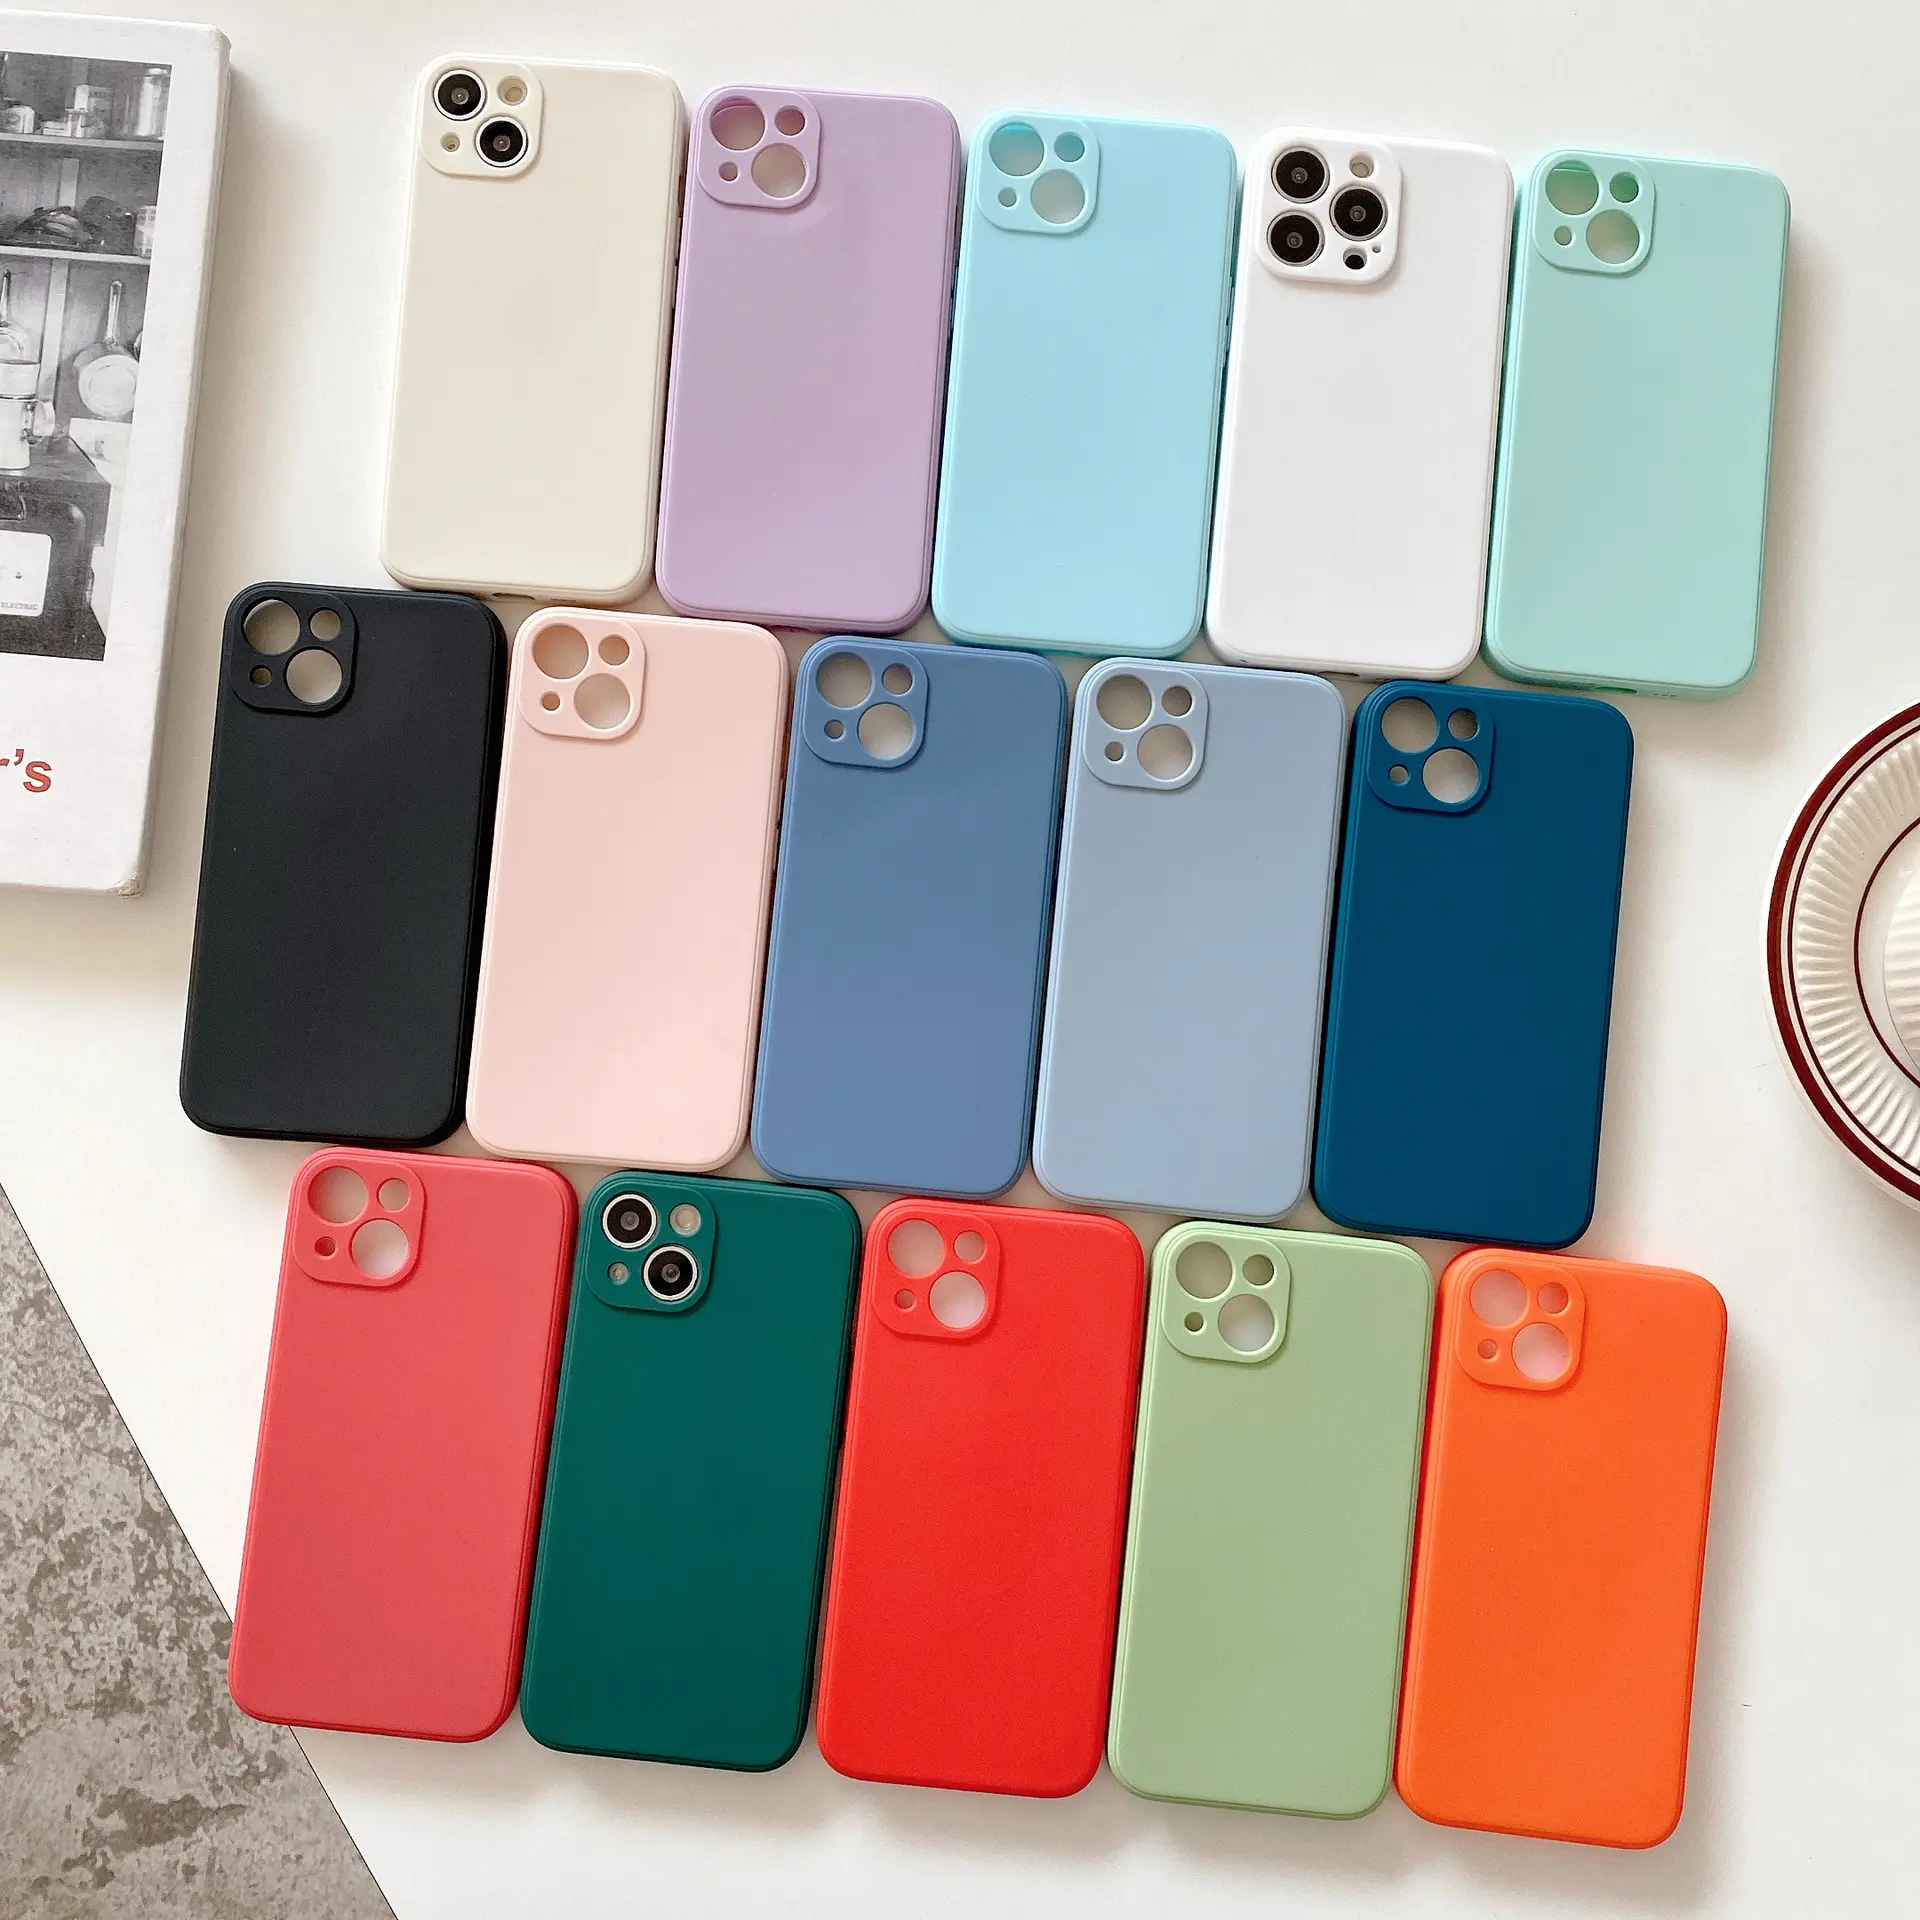 Case Rubber Shockproof Mobile Phone Cover Colorful Frosted Soft Rubber Soft TPU for Iphone 12 13 Pro Max ODM & OEM Perfectly Fit